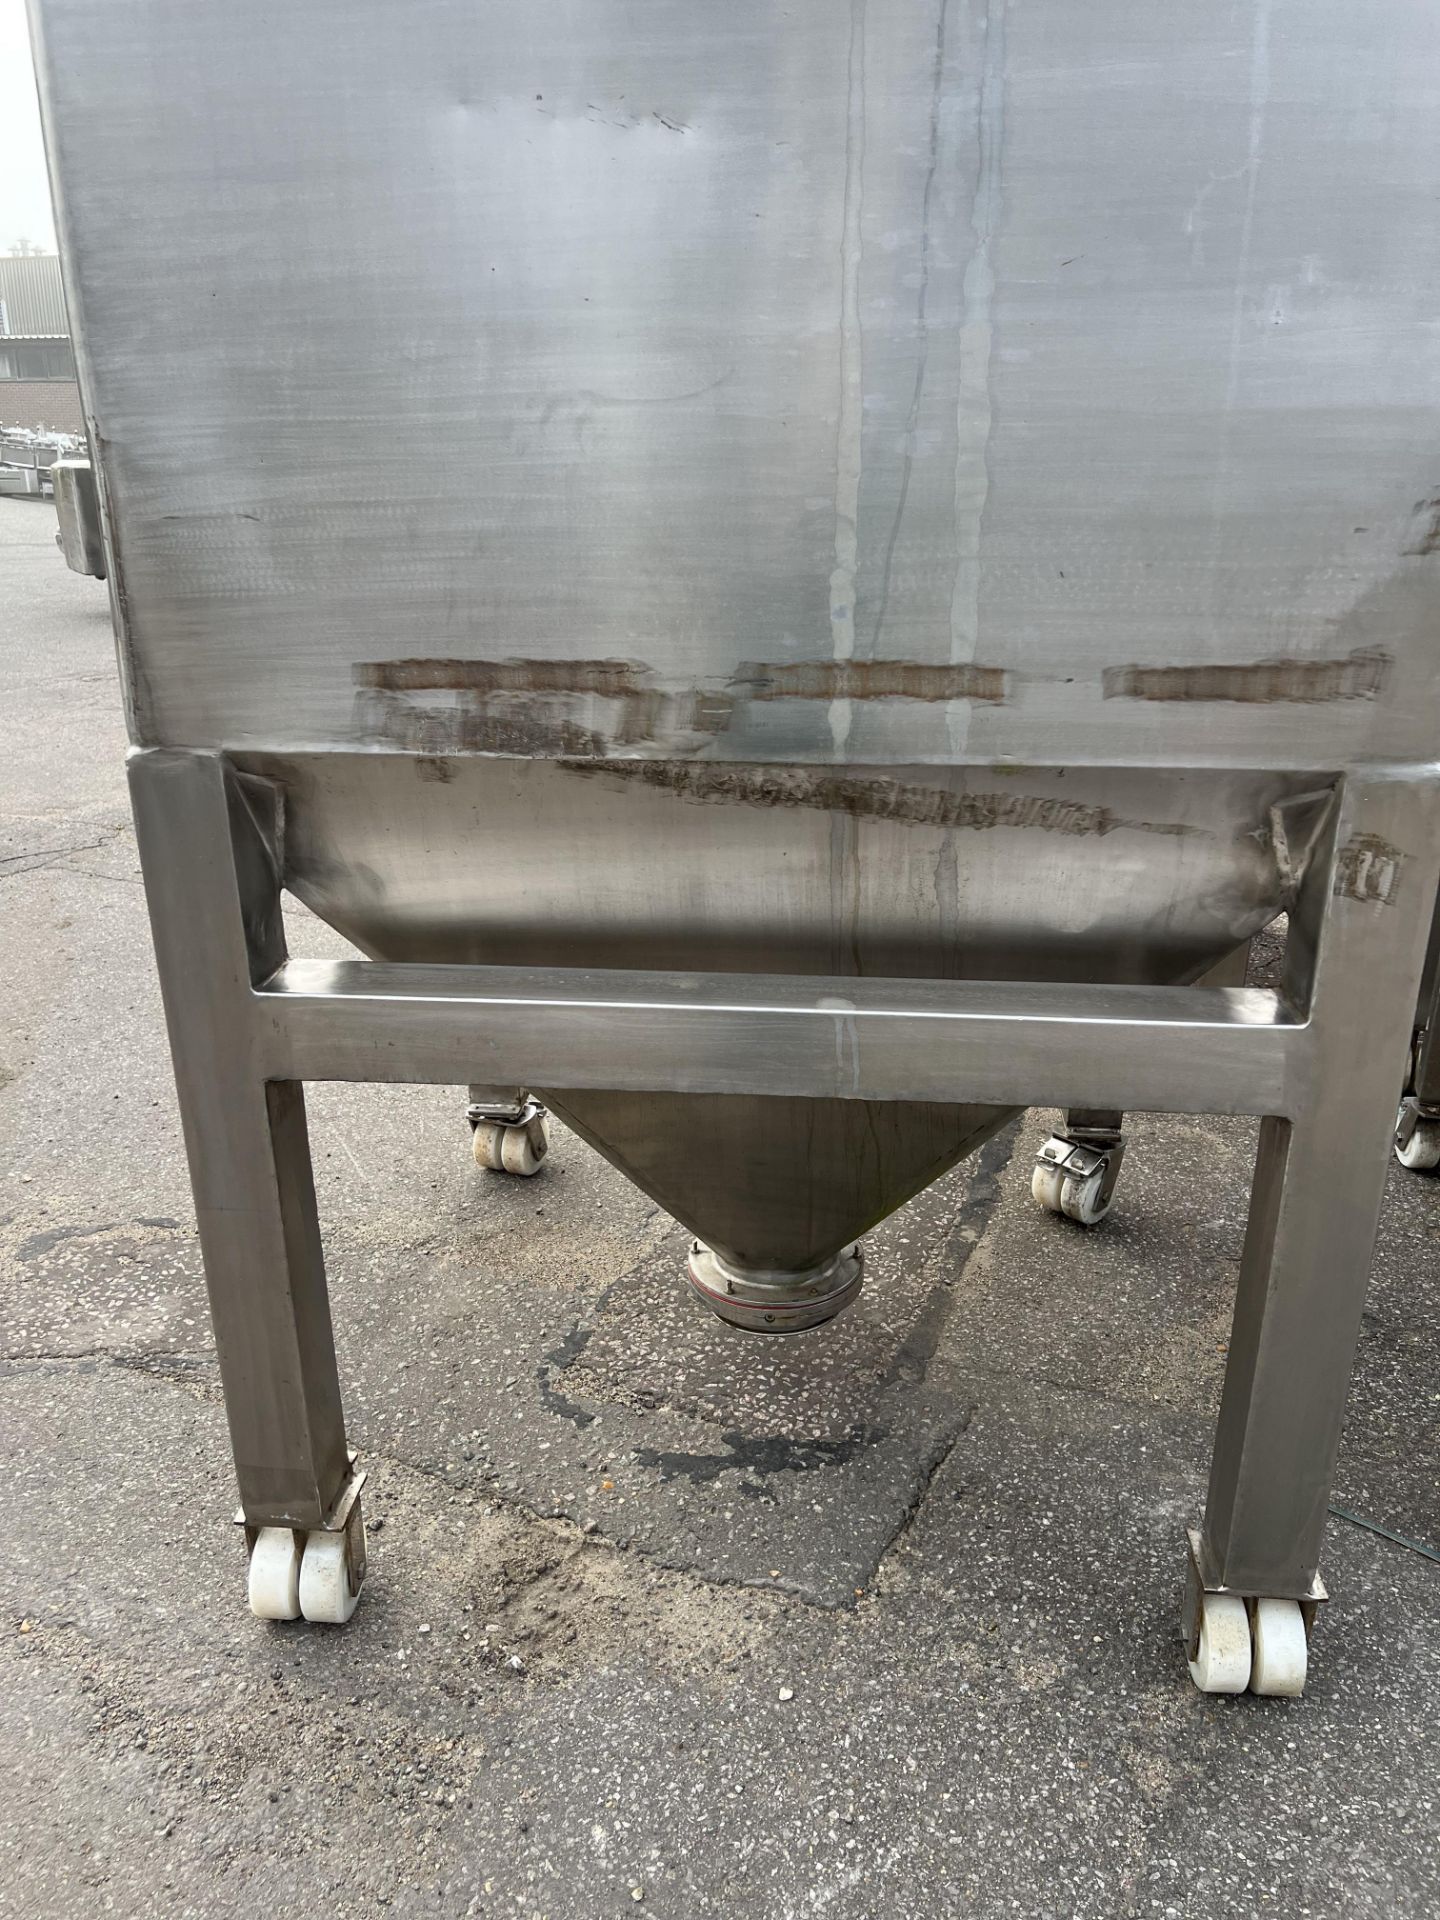 JPE IBC2 KL Fluted Stainless Steel Mobile Tank Lidded, with bottom outlet, approx. 1.5m x 1.4m x 2. - Image 2 of 2